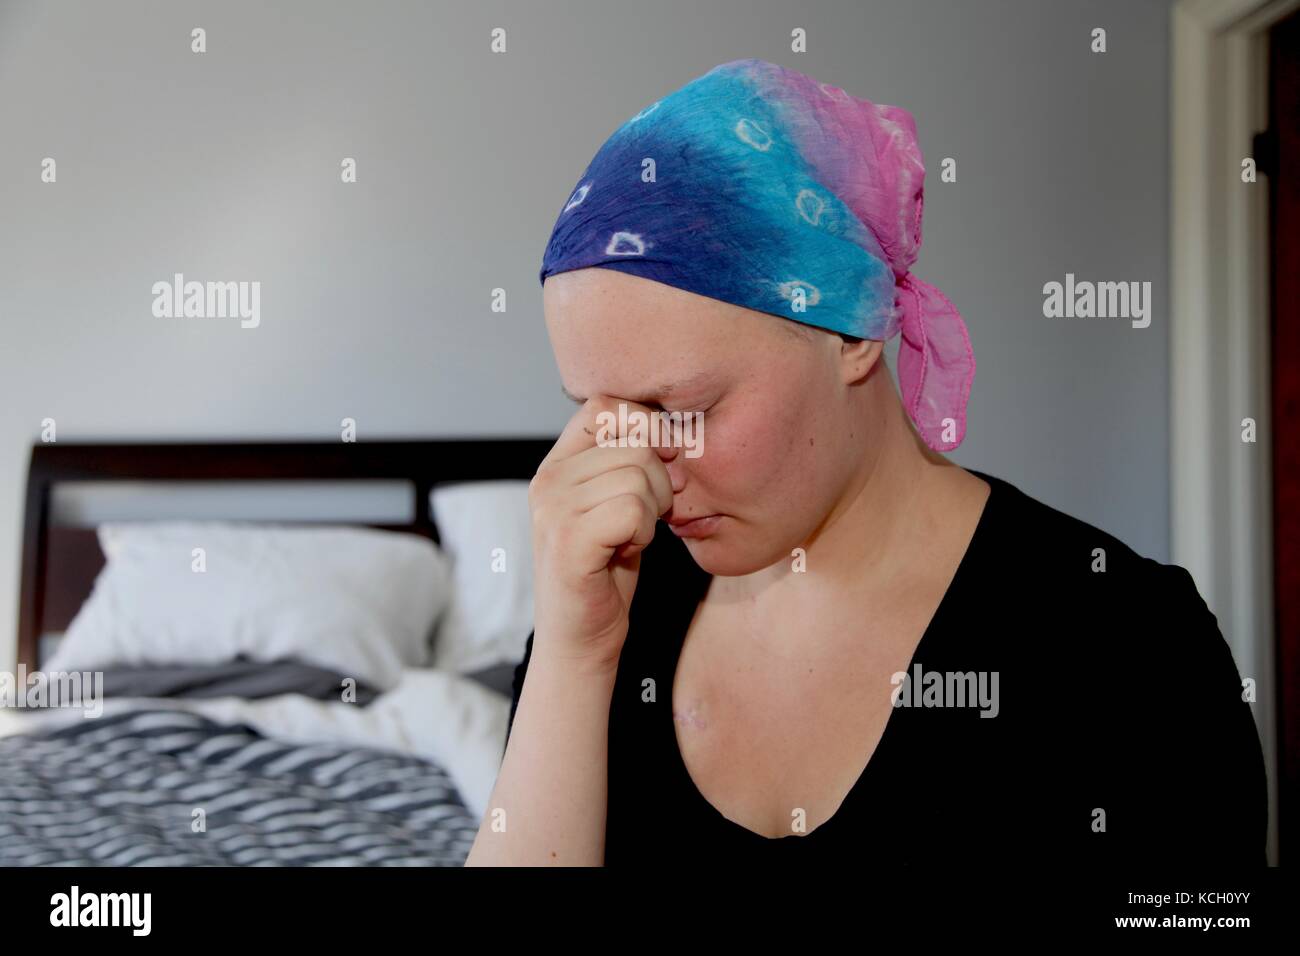 Young cancer patient in a headscarf holds head in hands with stress Stock Photo